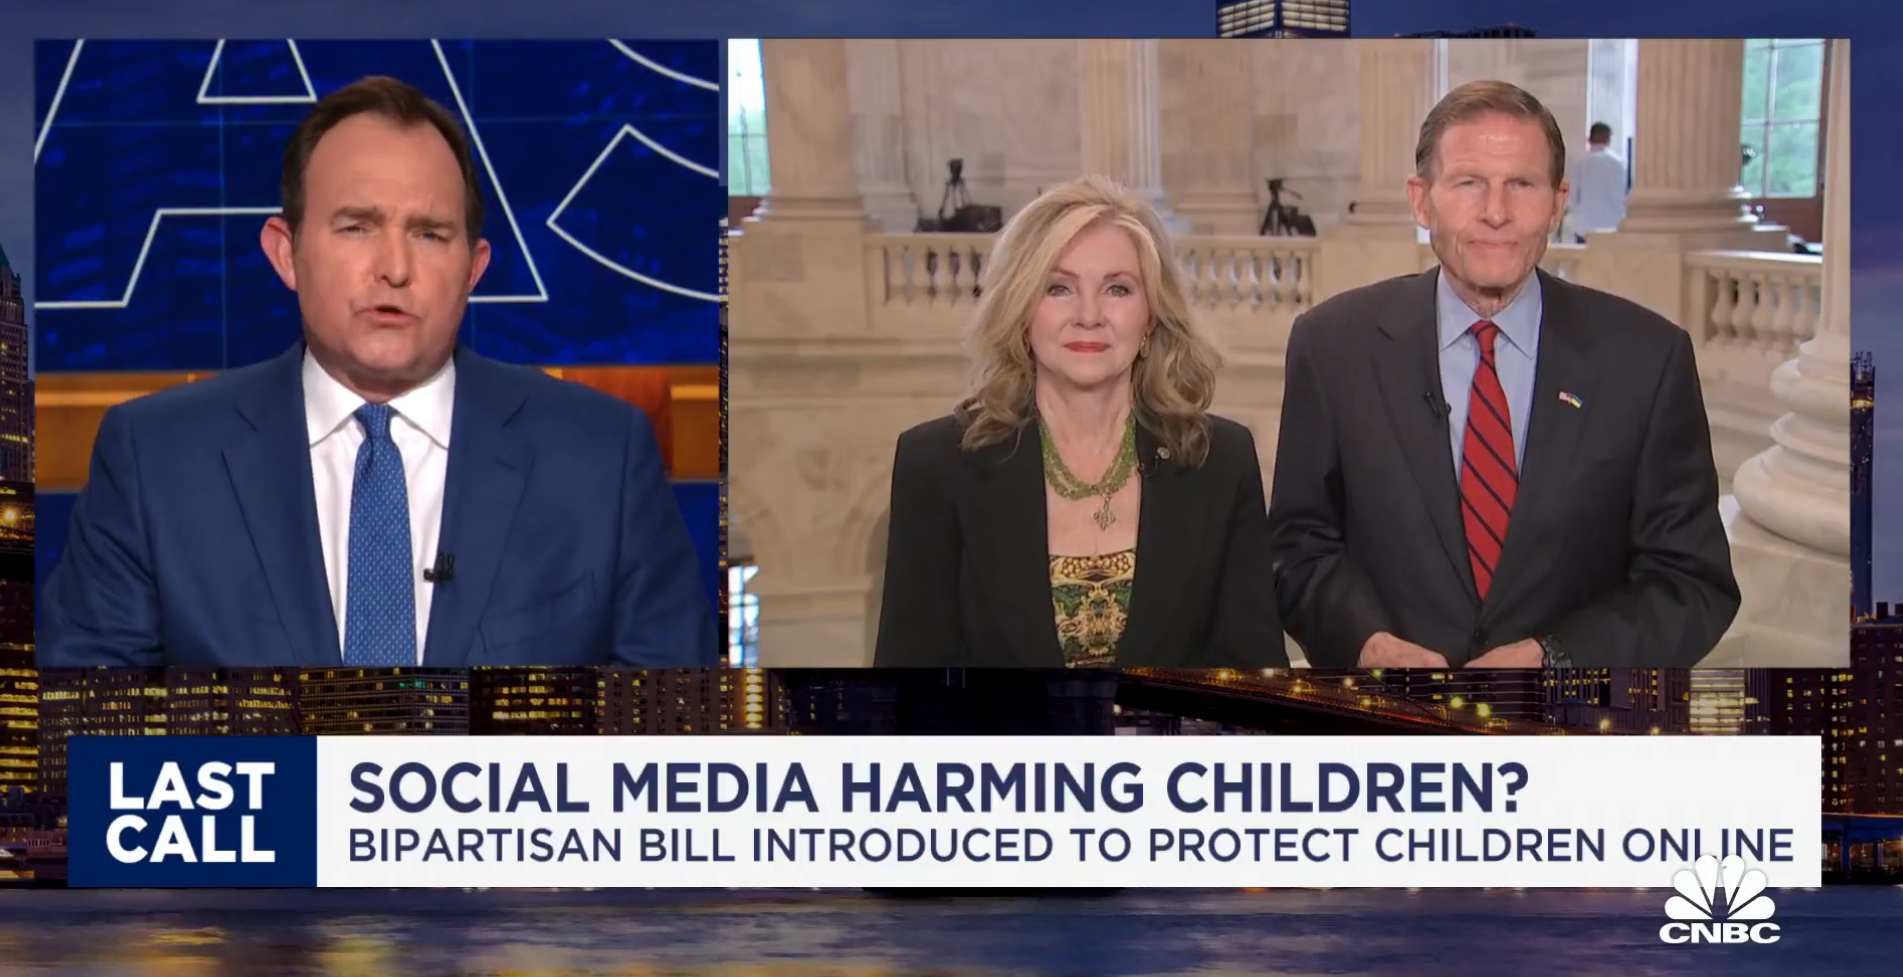 Blumenthal and Blackburn appeared on CNN, CBS This Morning, CNBC, Fox News, and GMA3 on ABC to discuss the bipartisan legislation. Blumenthal also appeared on MSNBC.